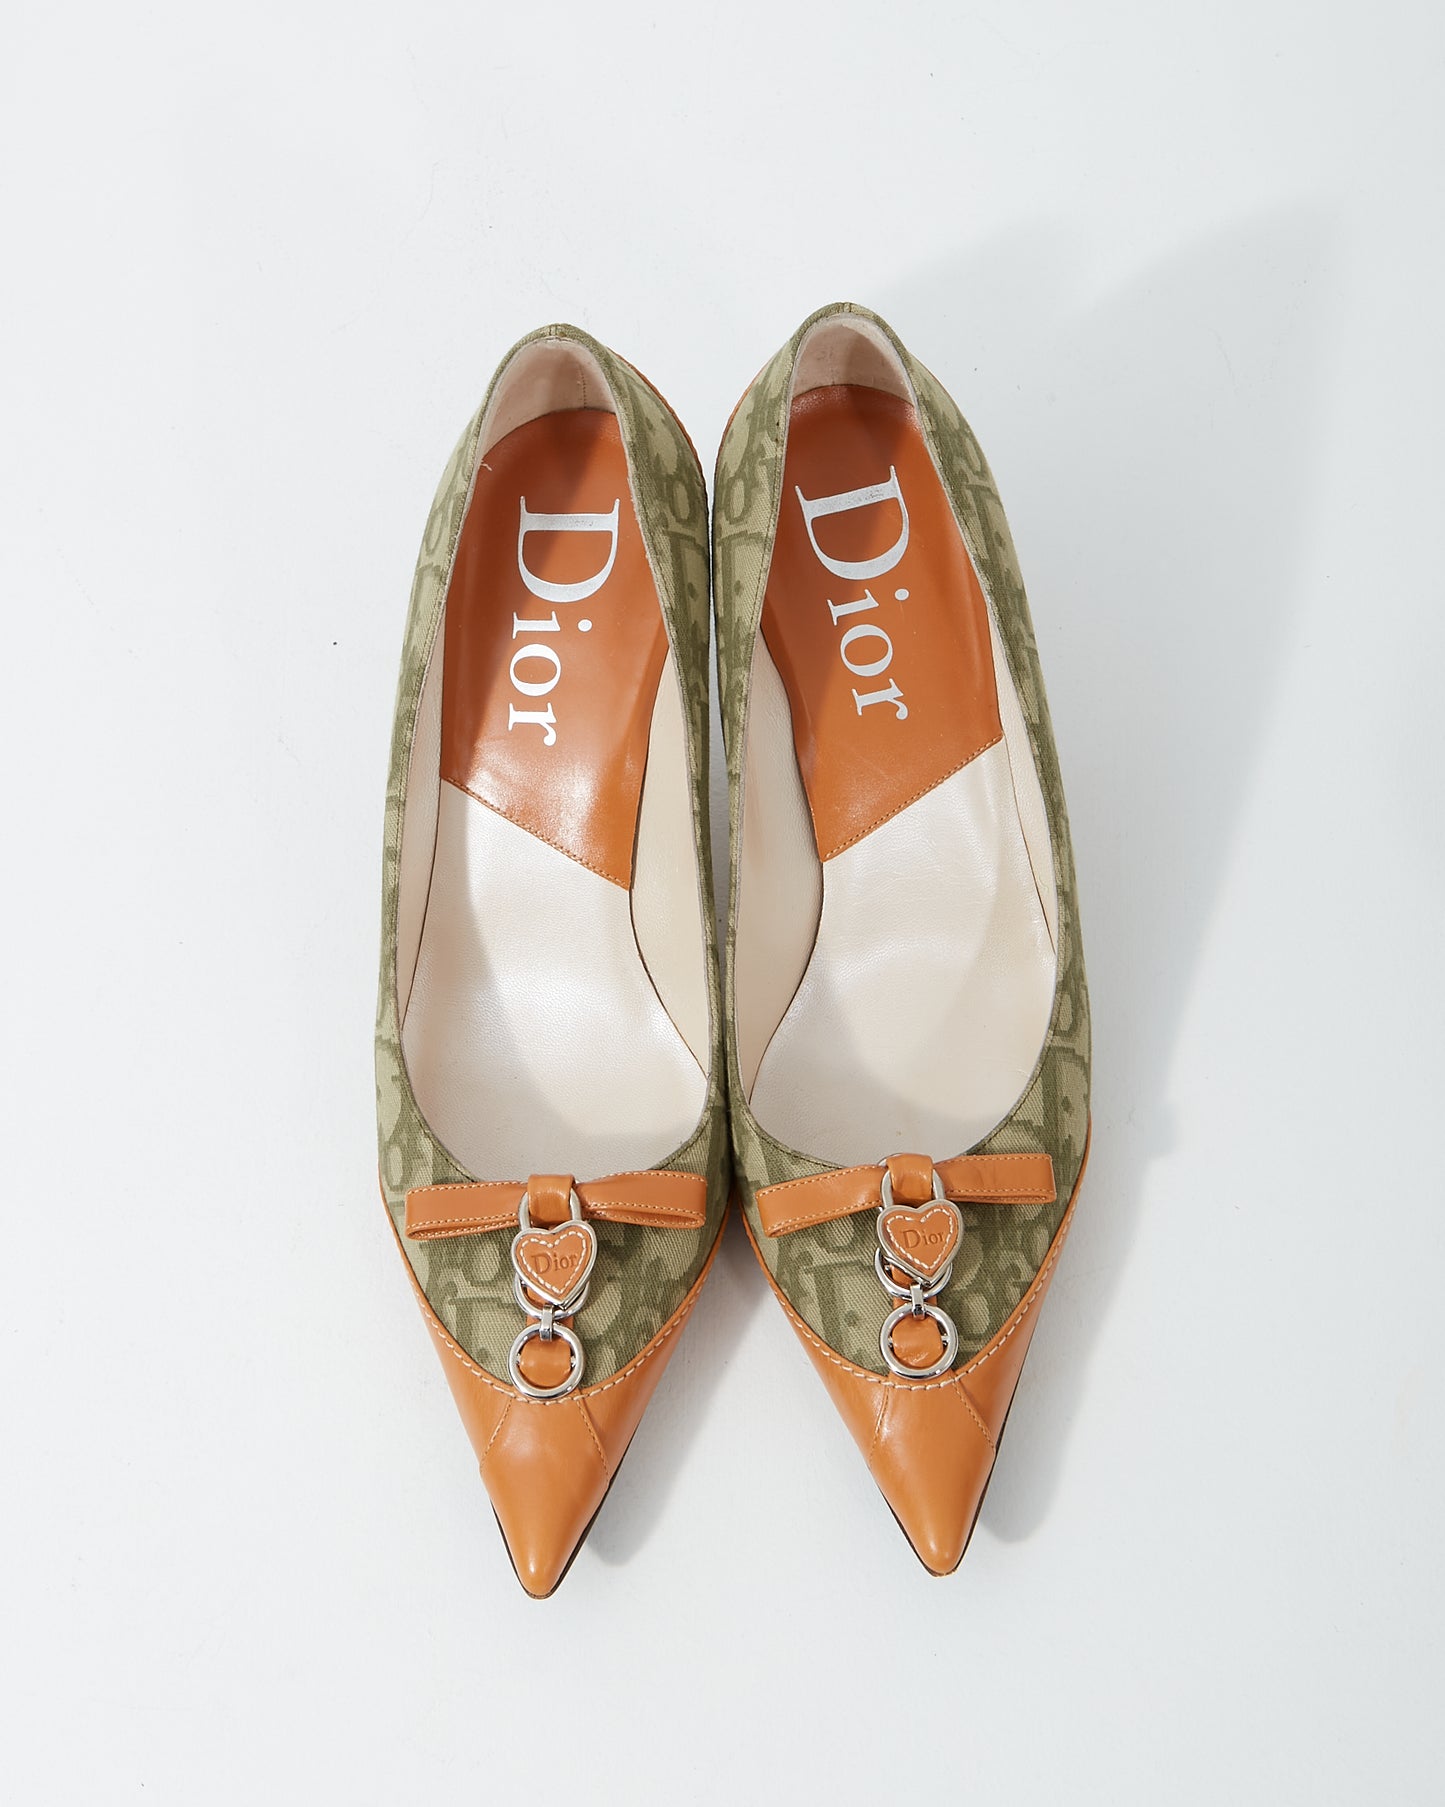 Dior Vintage Green/Tan Canvas & Leather Point Toe Pumps - 38.5